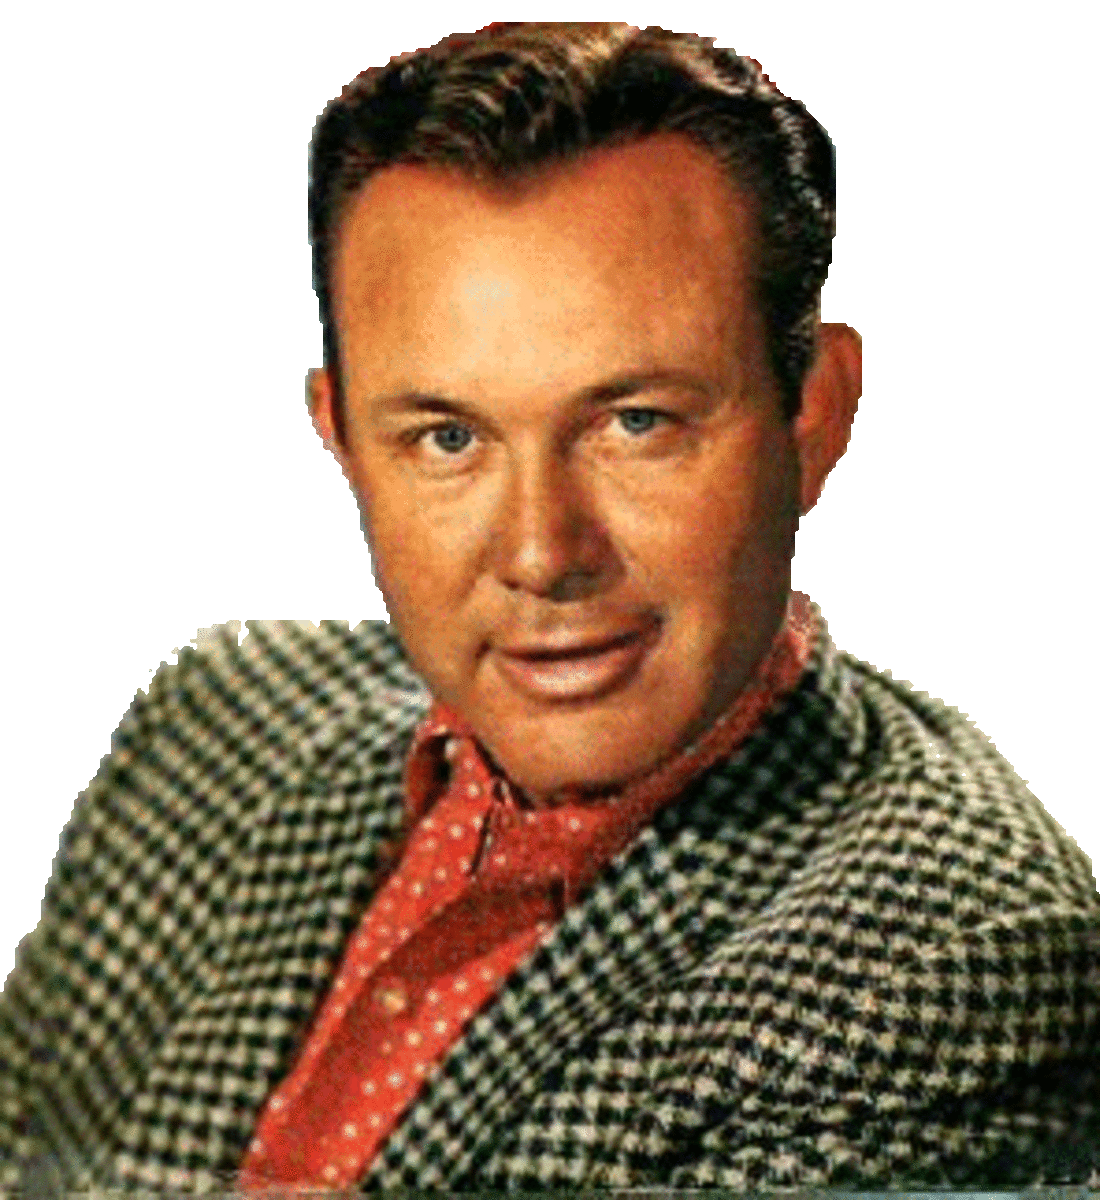 Biography of Jim Reeves - A Country Music Legend